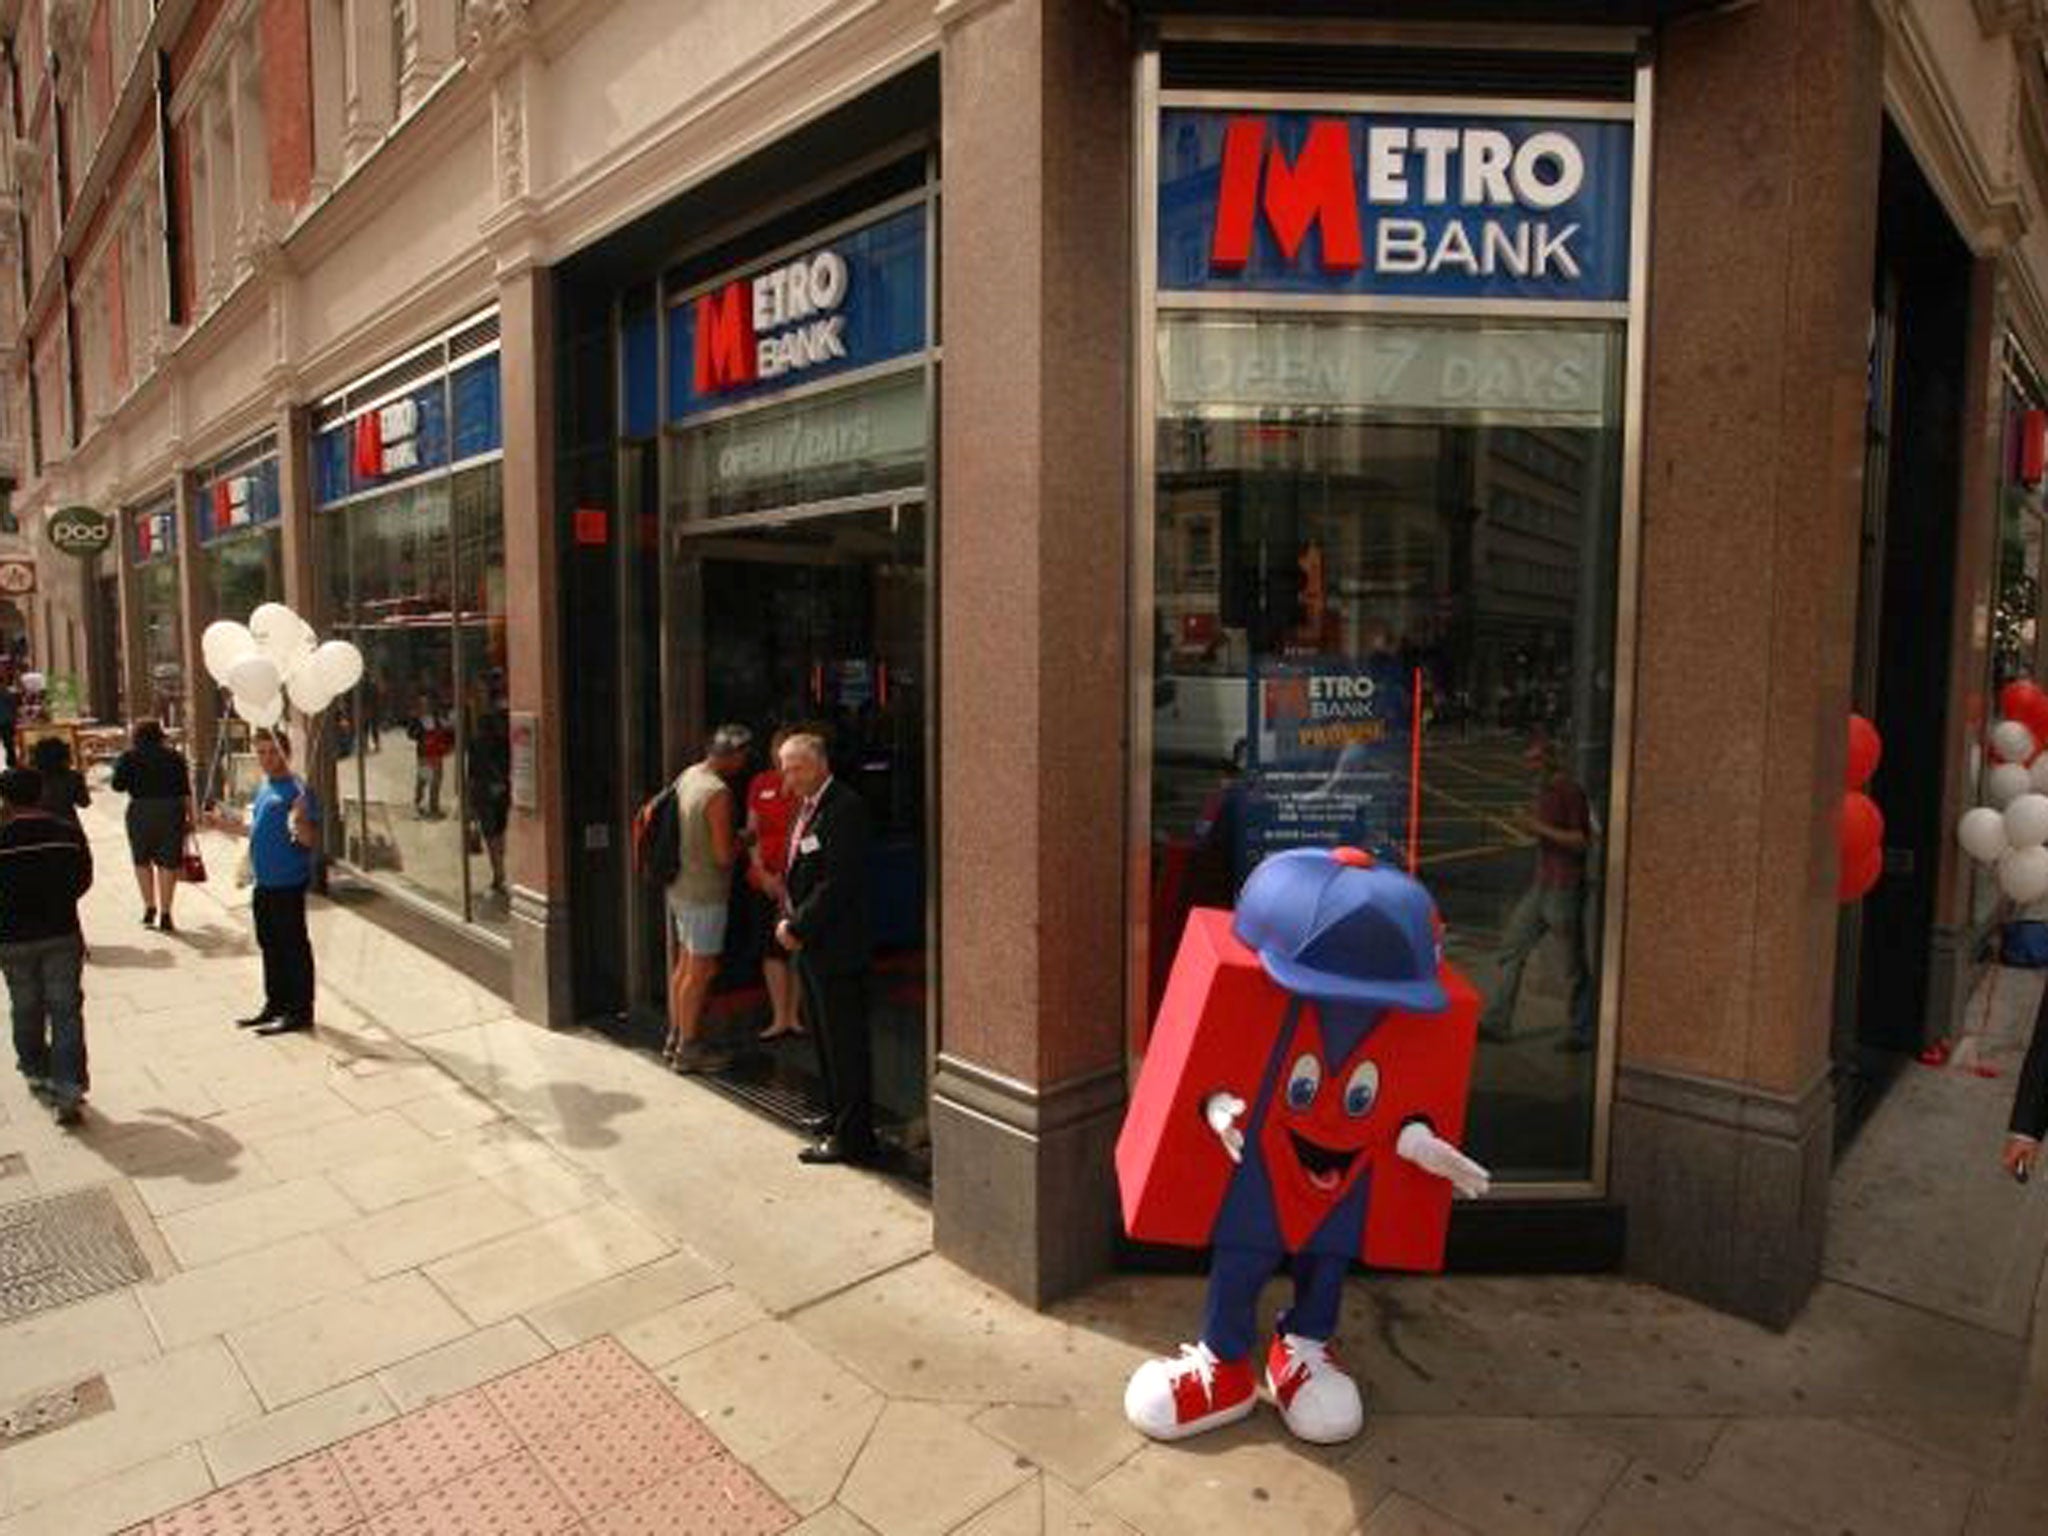 Metro Bank batted a reader away when he raised concerns about pre-pay cards